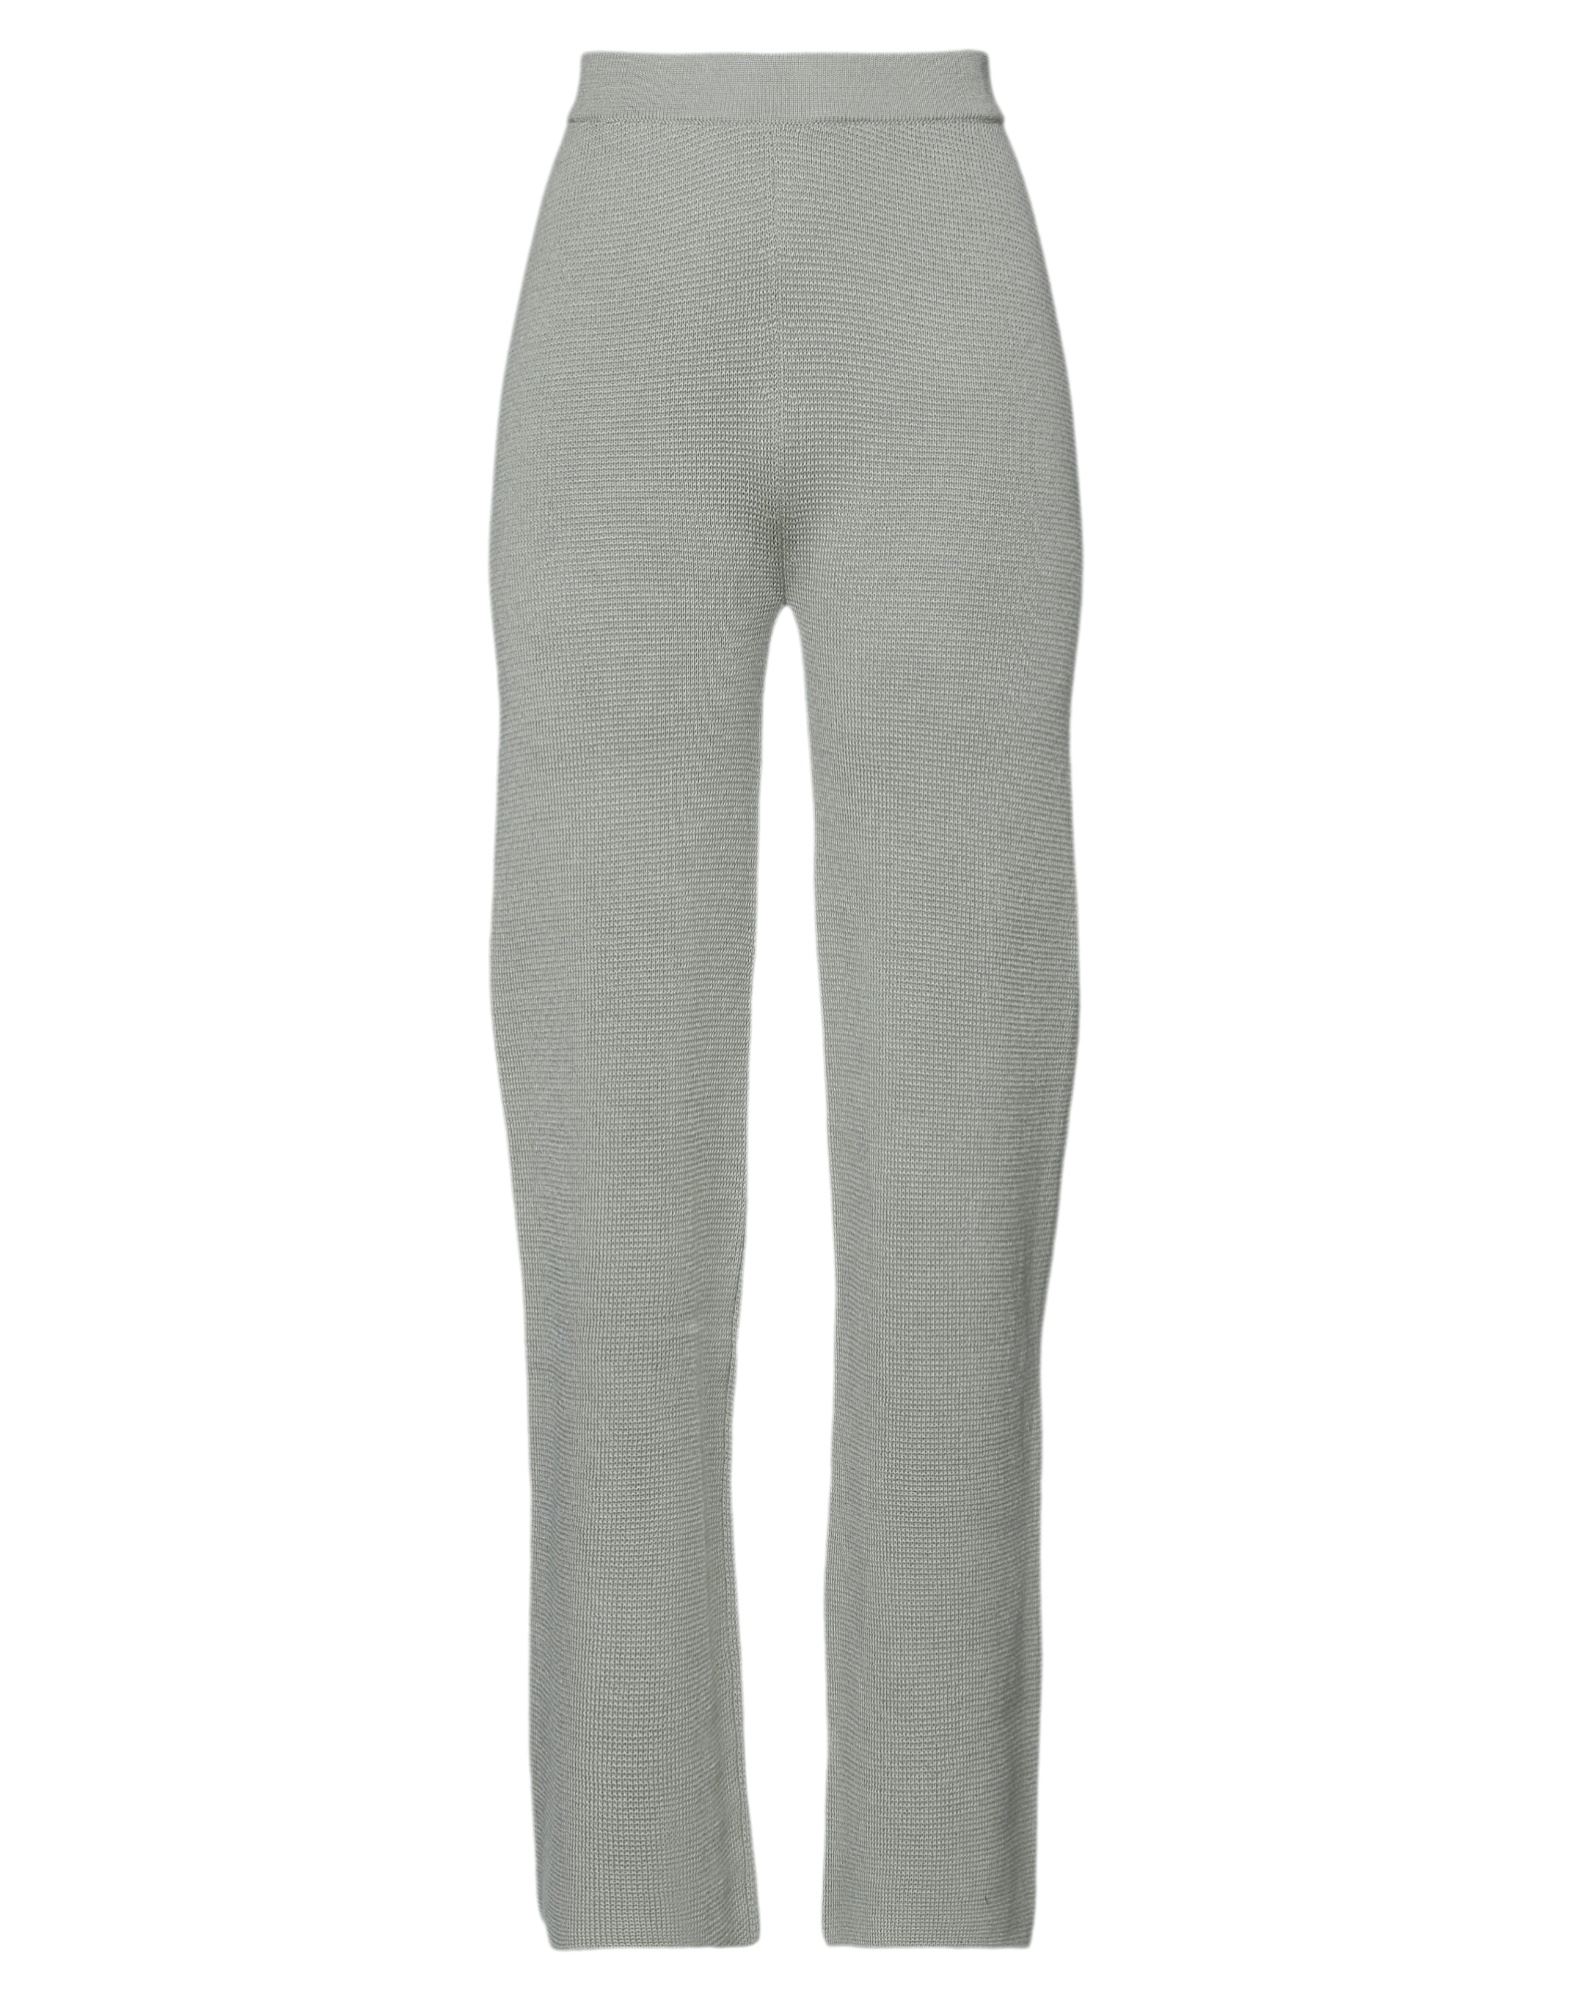 Carcel Pants In Sage Green